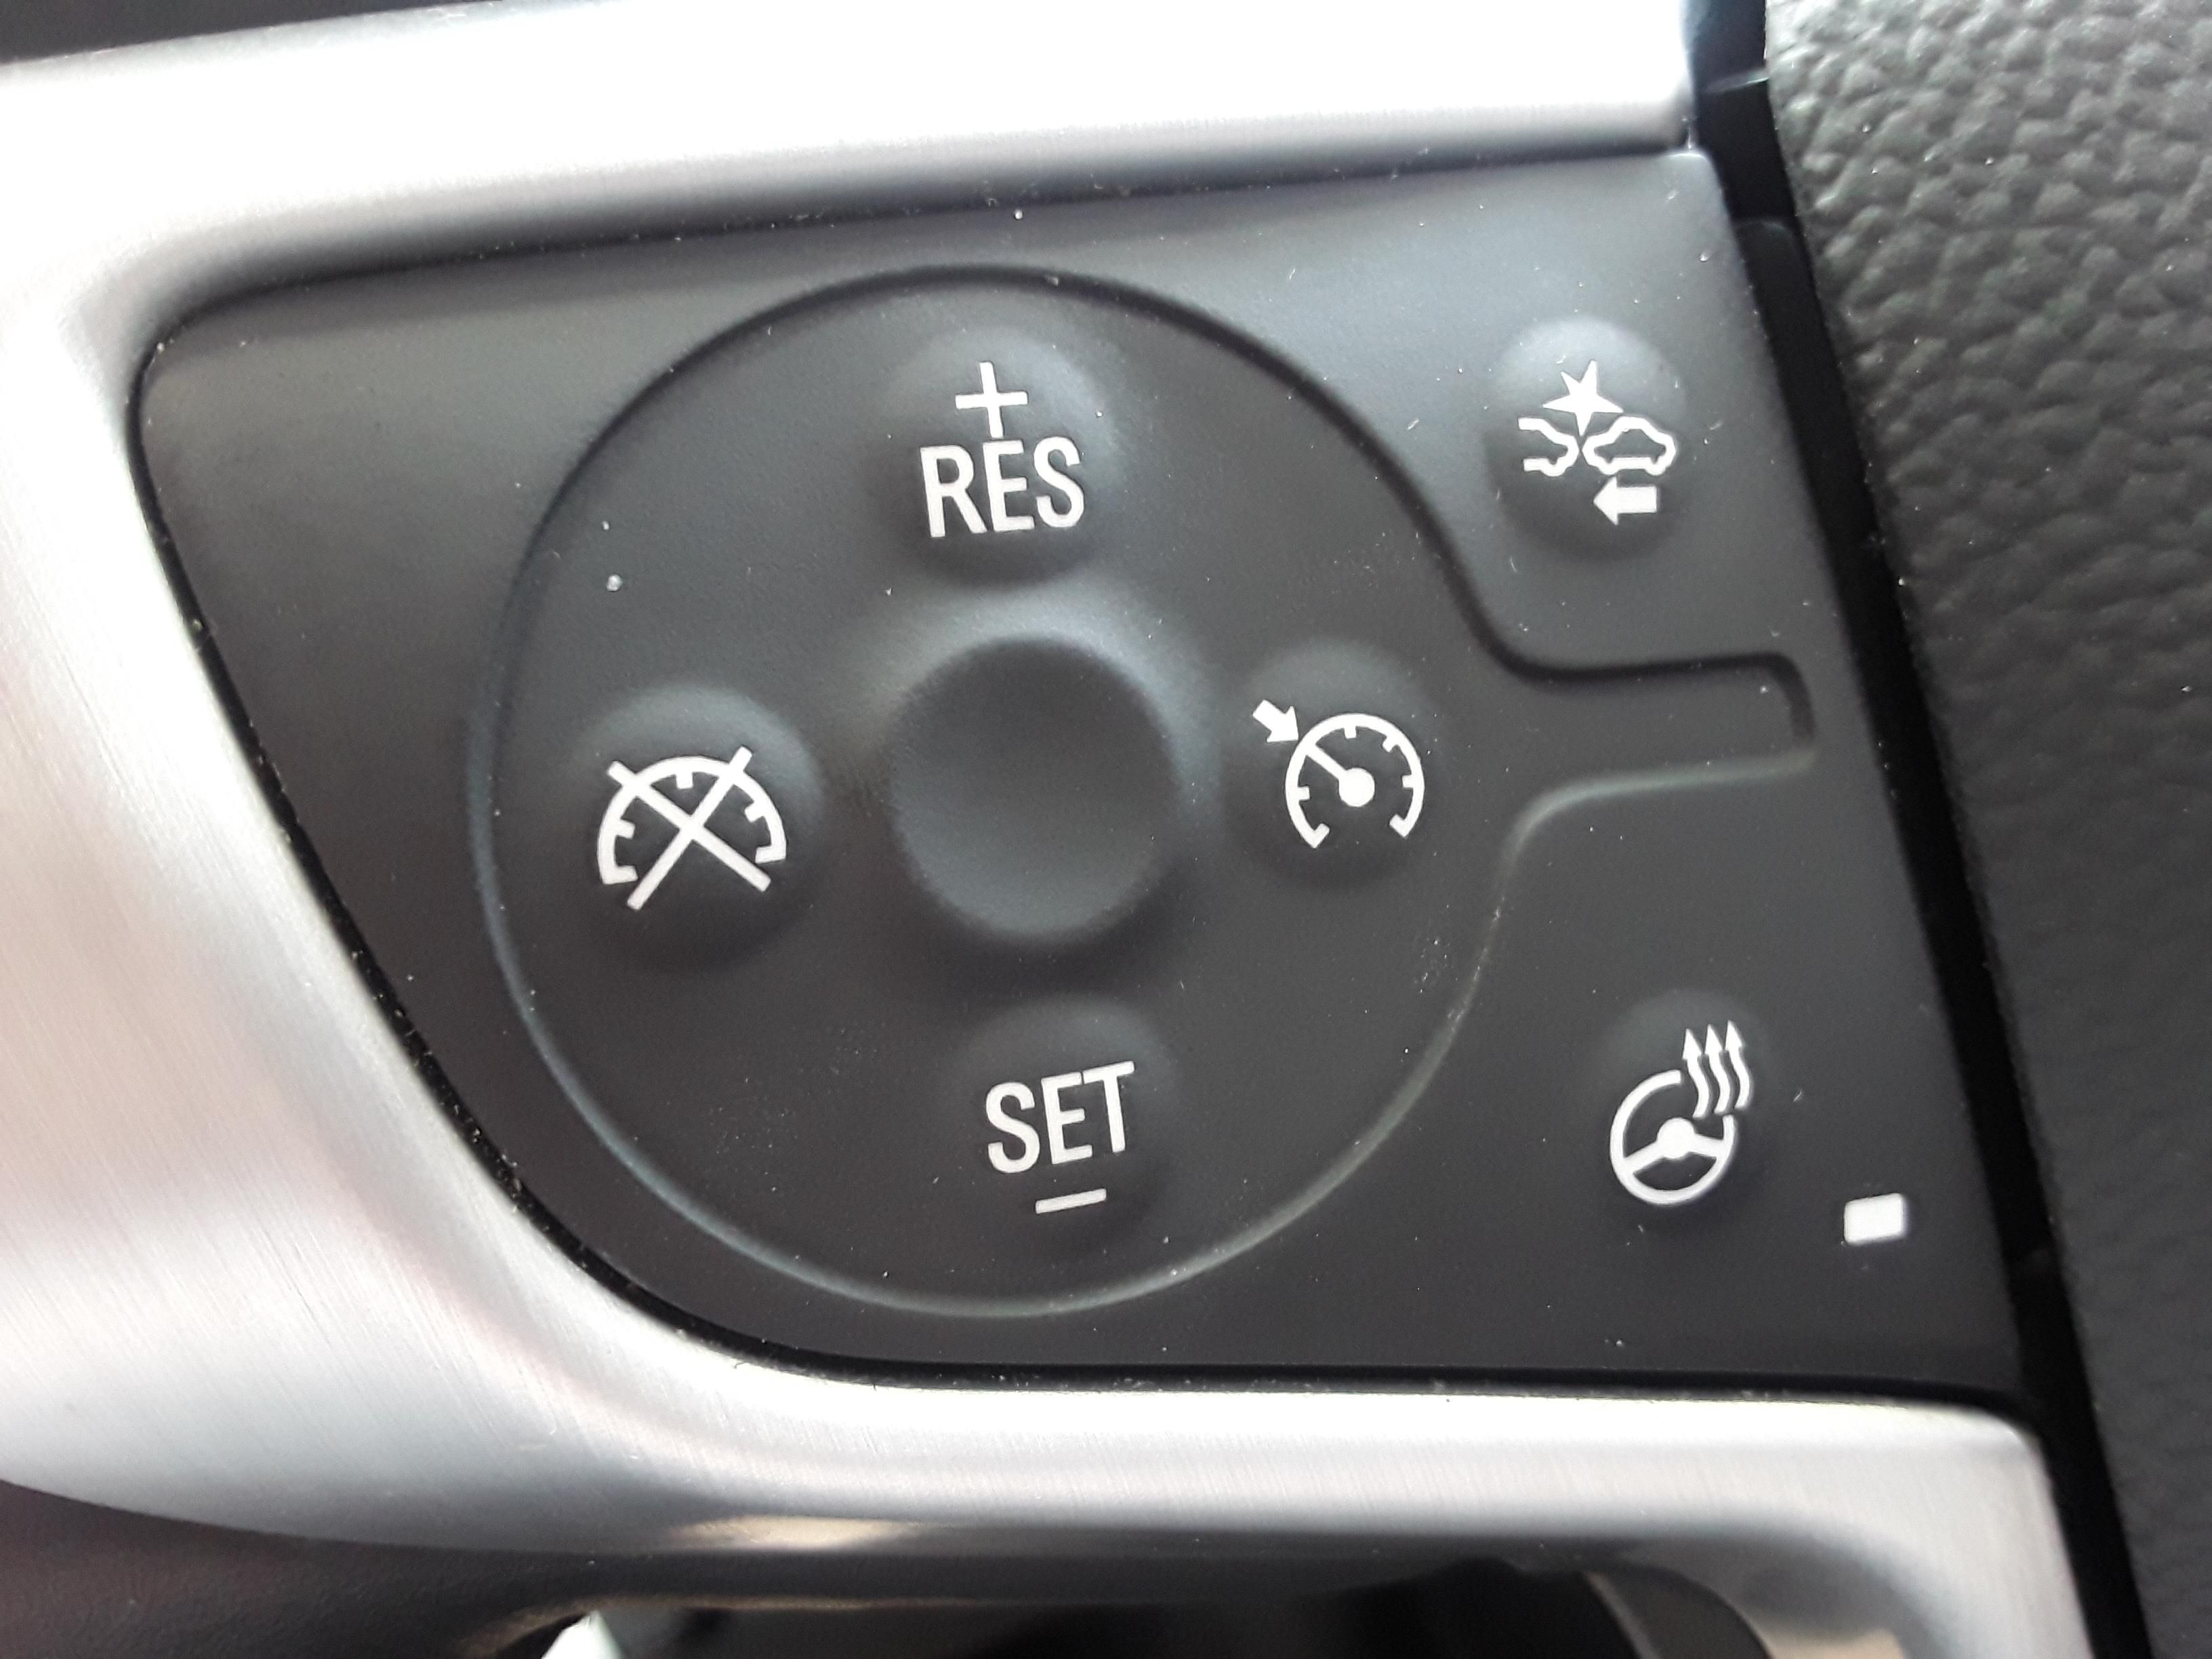 My rental car has a "ram the guy in front of you" button